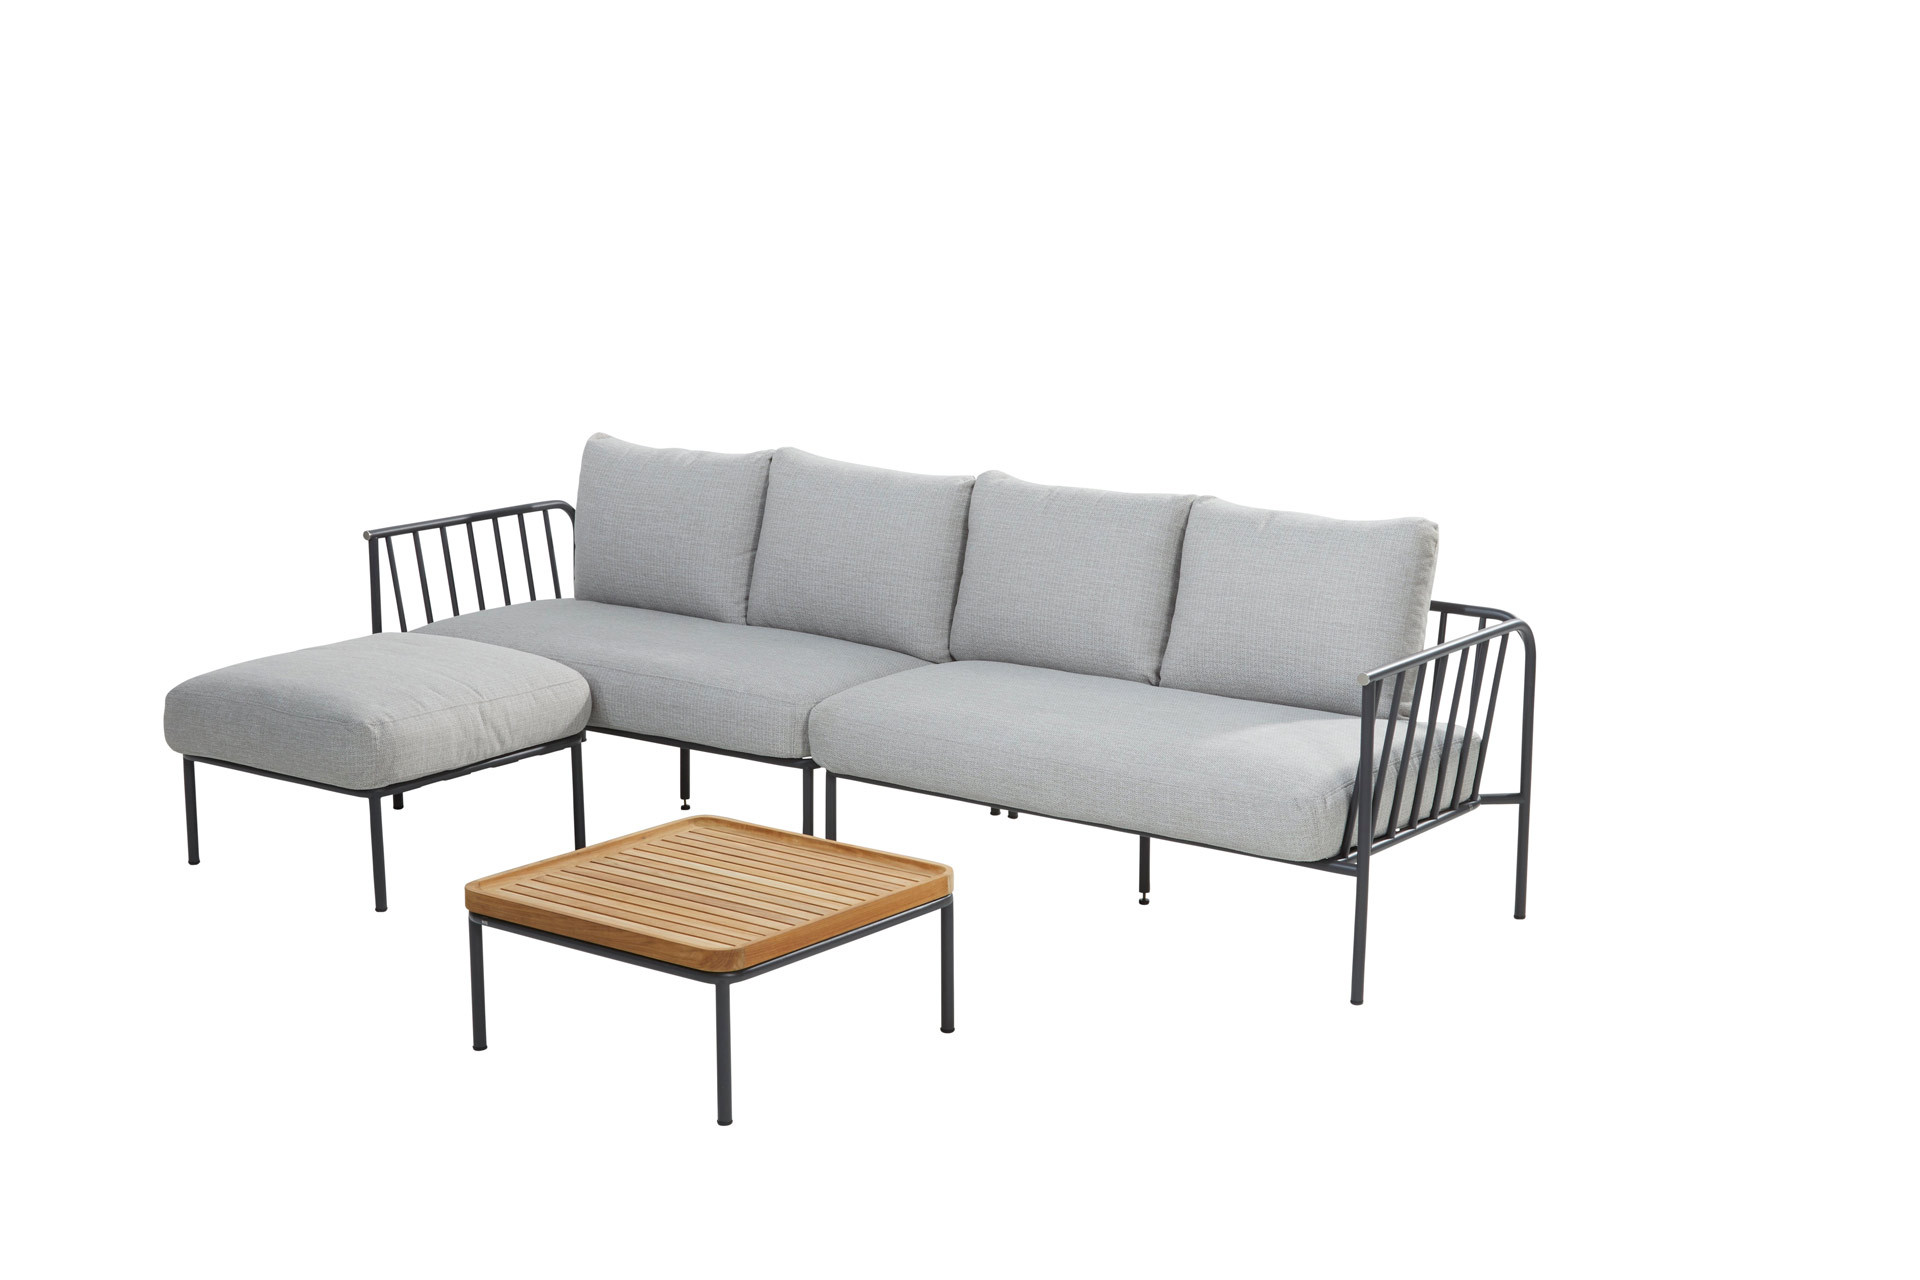 Figaro modular 4-seater bench with island and coffeetable